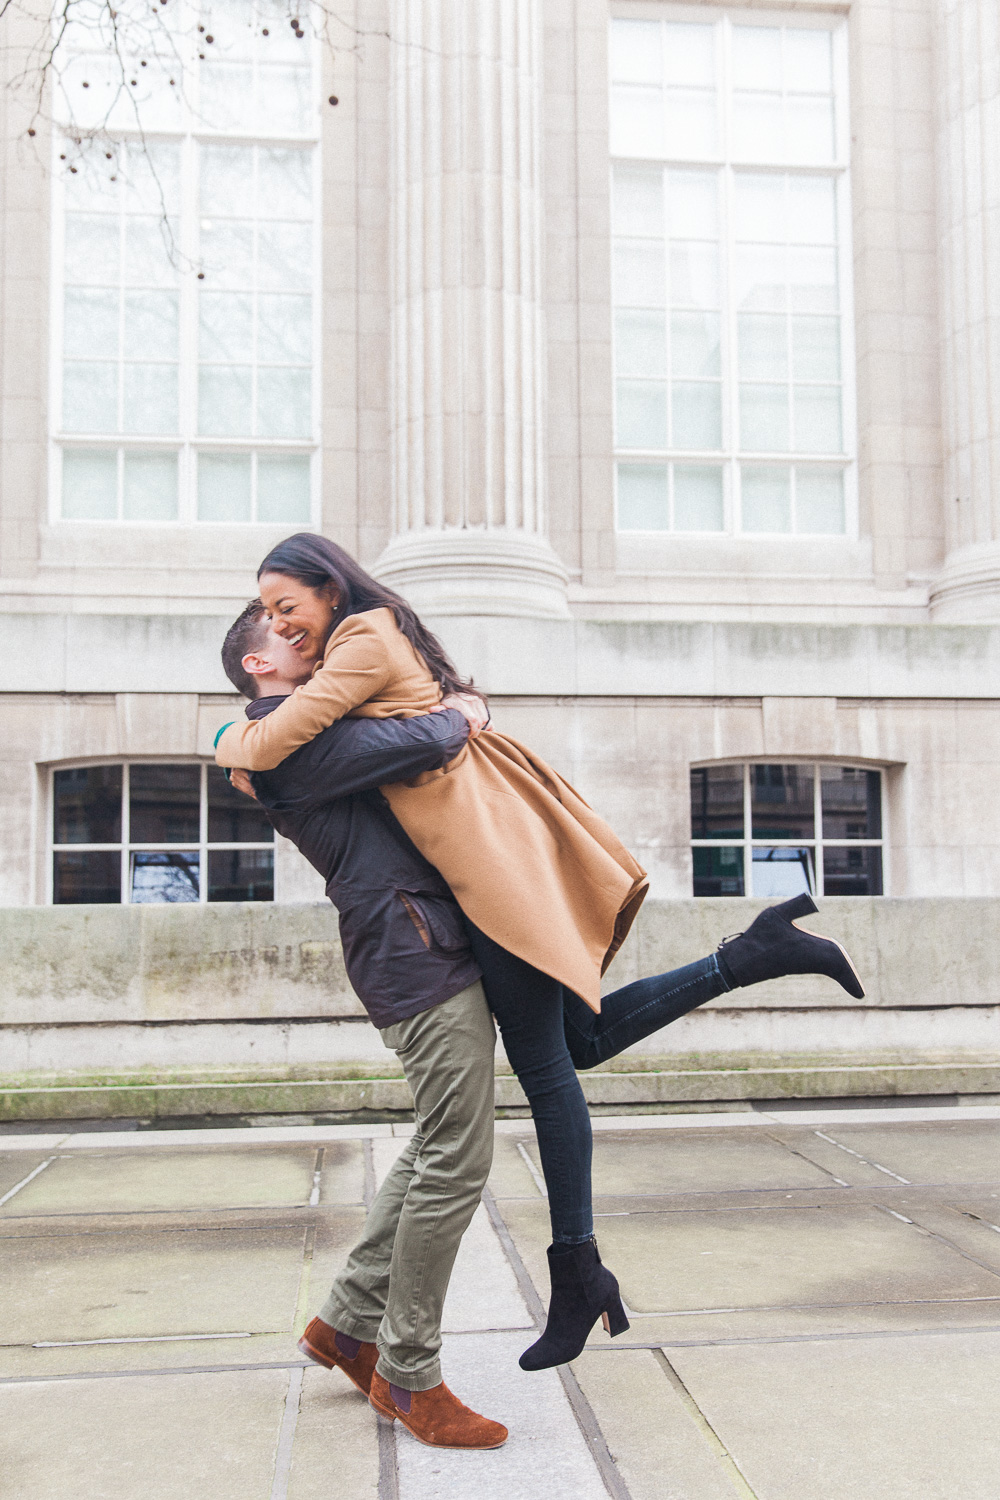 Groom lifting bride during their engagement shoot in London